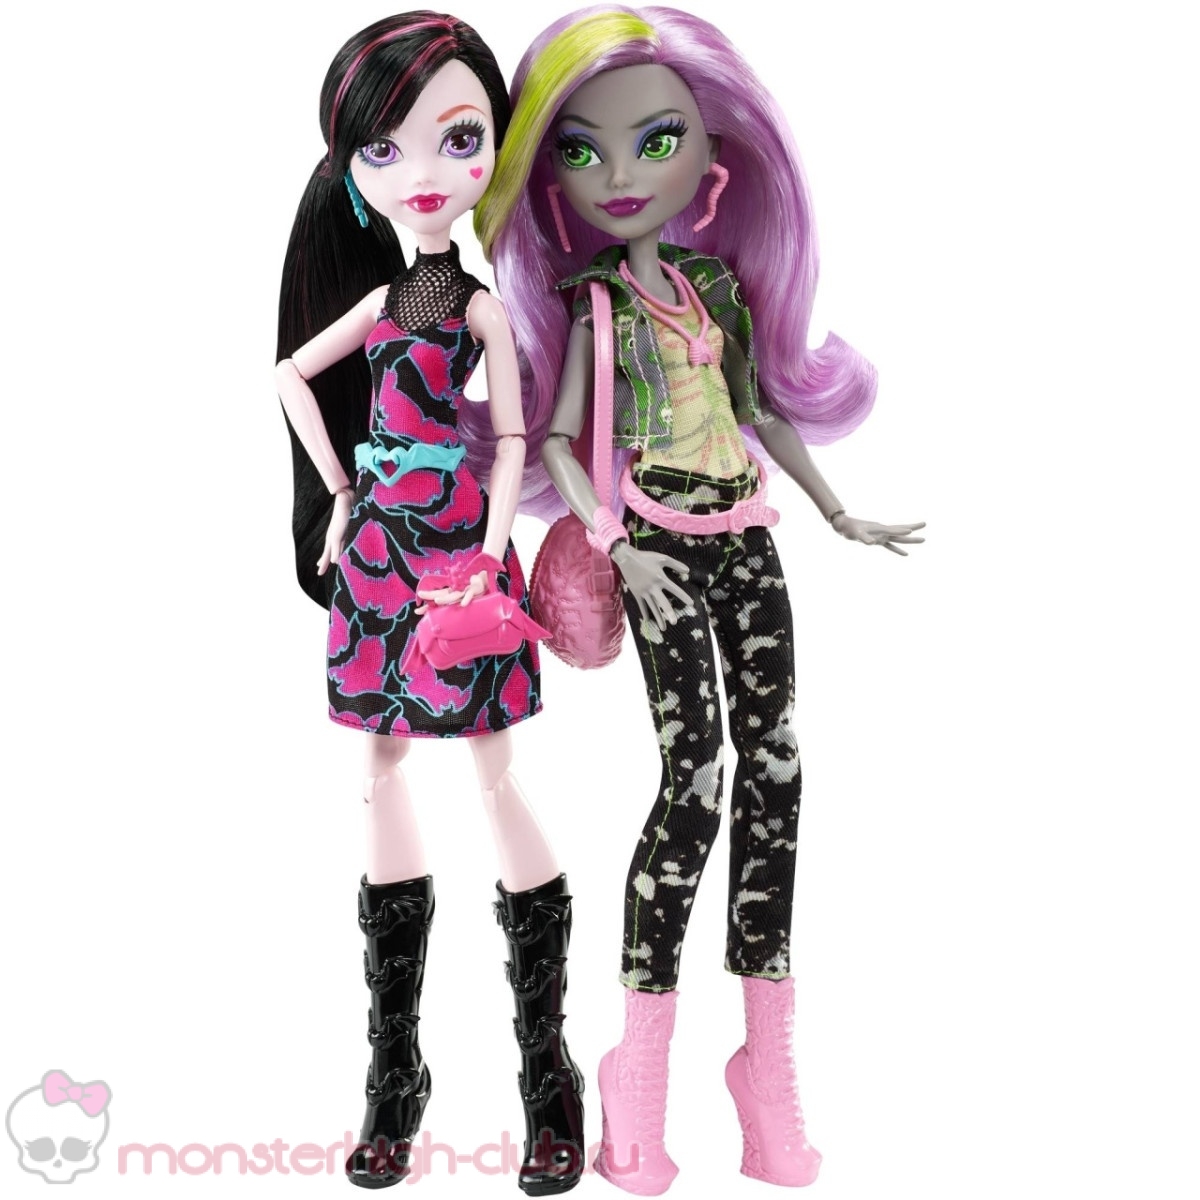 monster_high_moanica_d'kay_draculaura_welcome_to-monster_high_2pack (1)